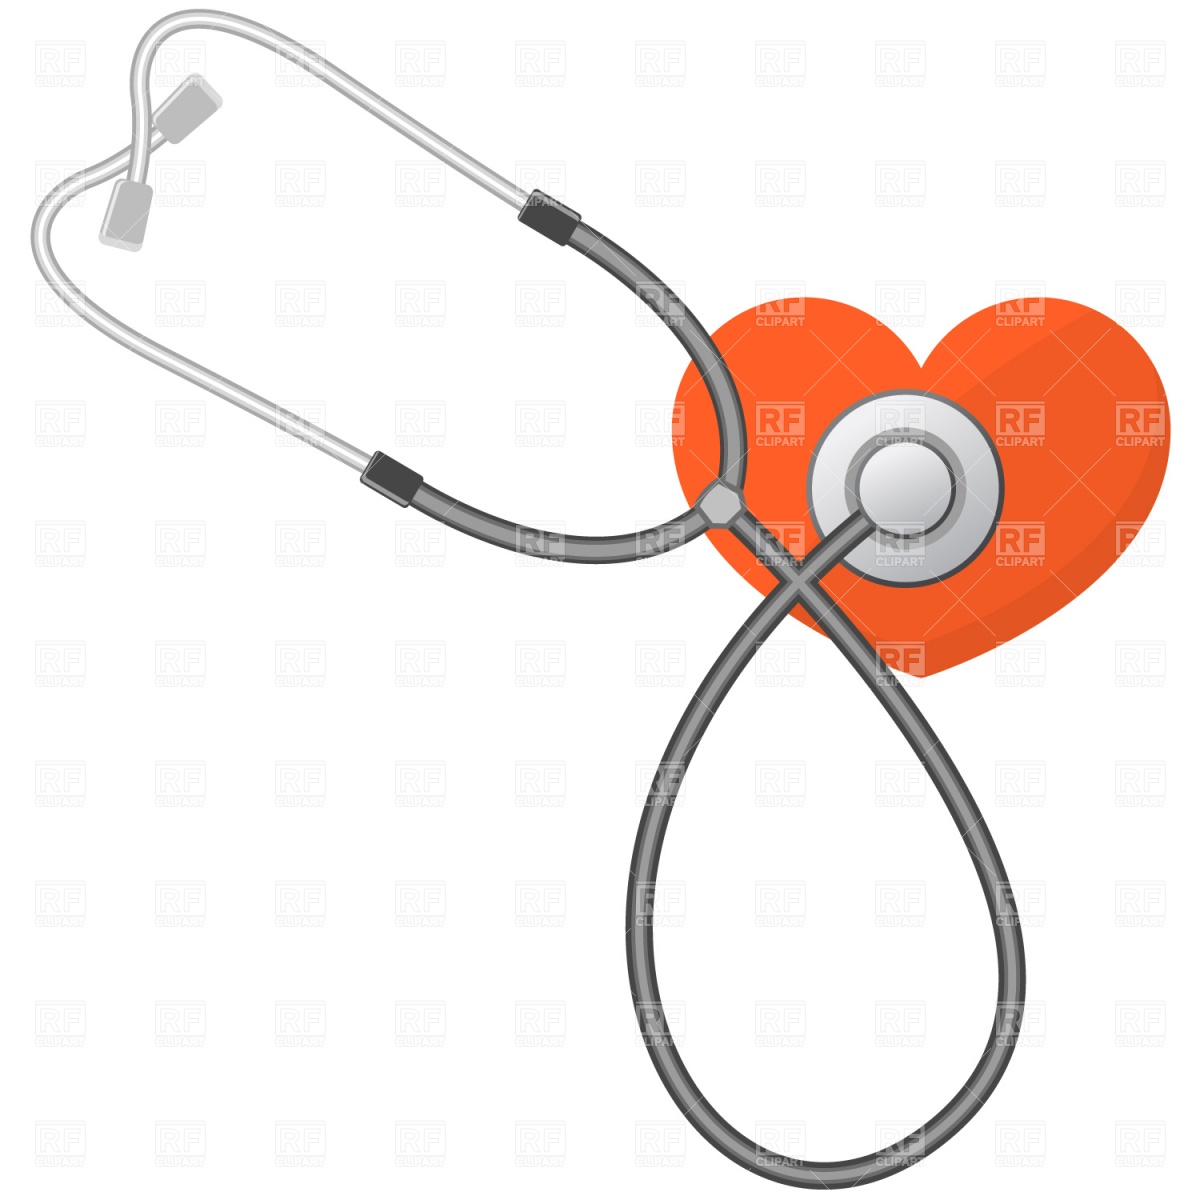 Free healthcare clipart images - ClipartFest